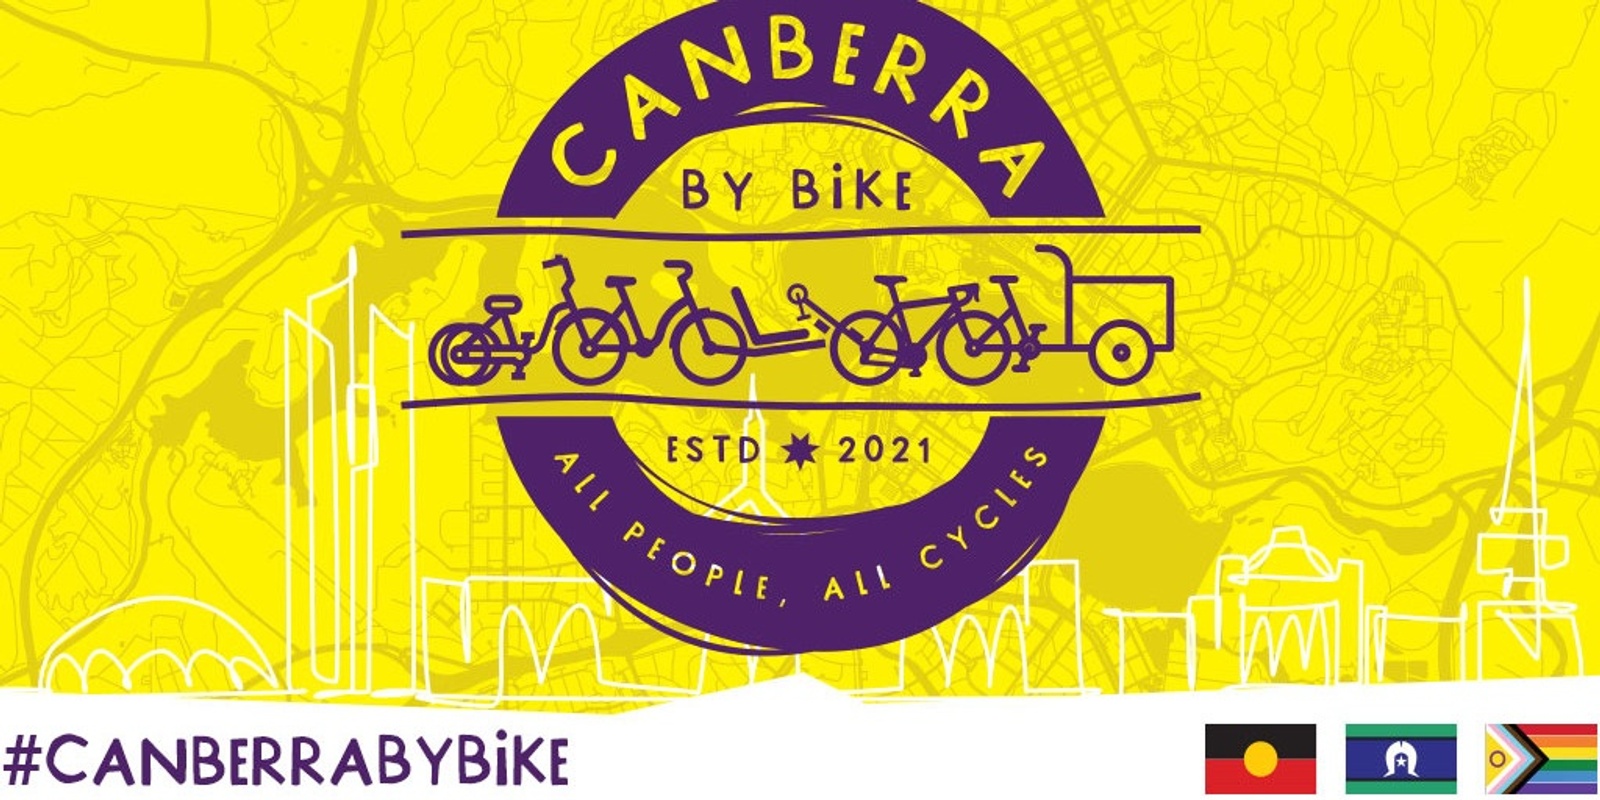 Canberra by Bike's banner